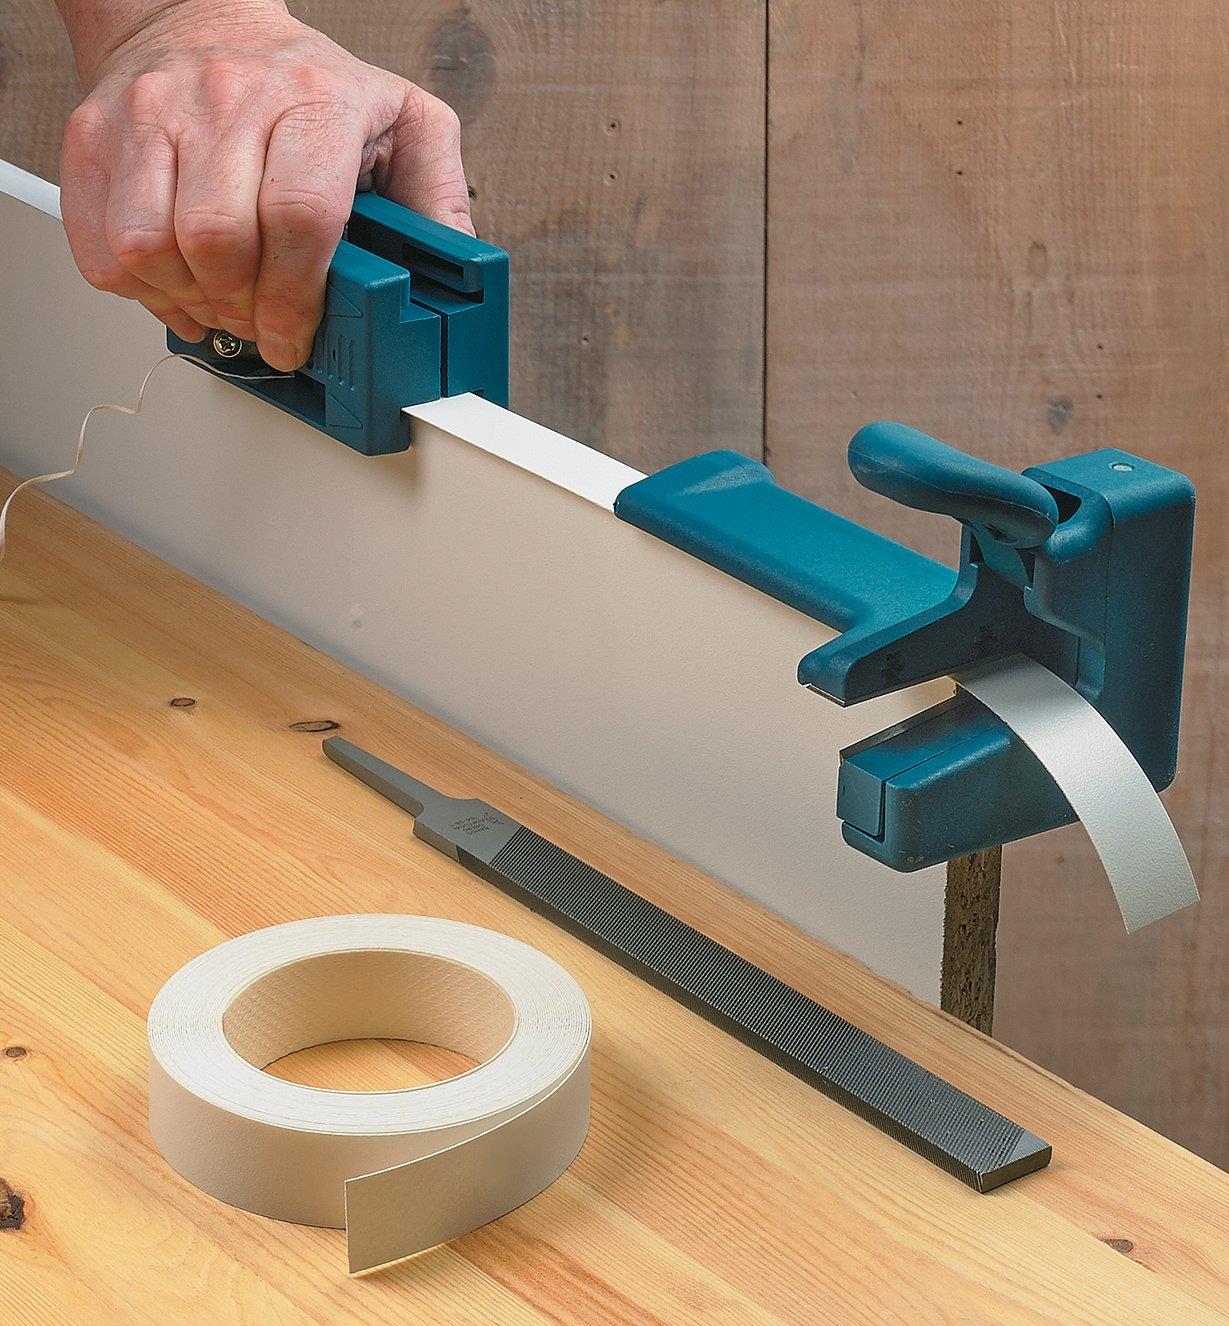 Using an edge trimmer and end trimmer to cut Melamine Edge Banding